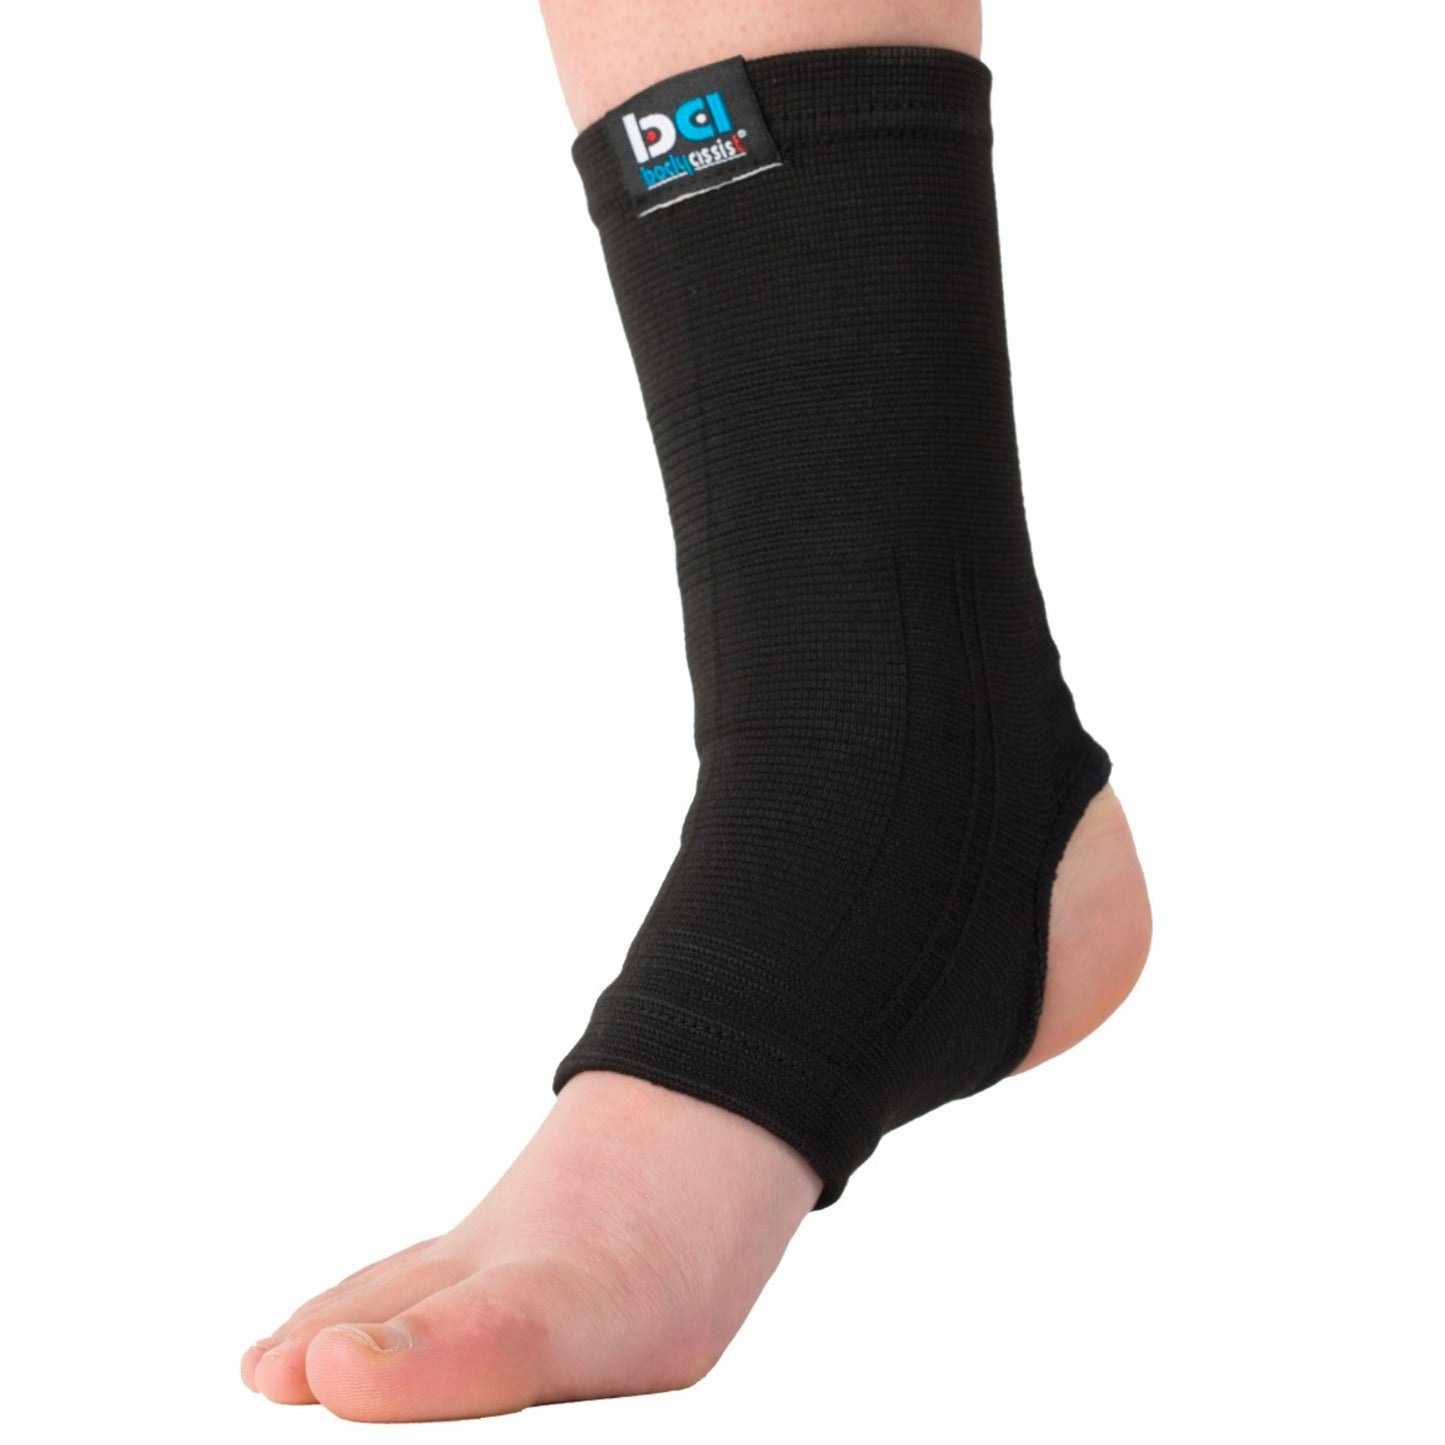 Elastic Ankle Support  - Body Assist (1)